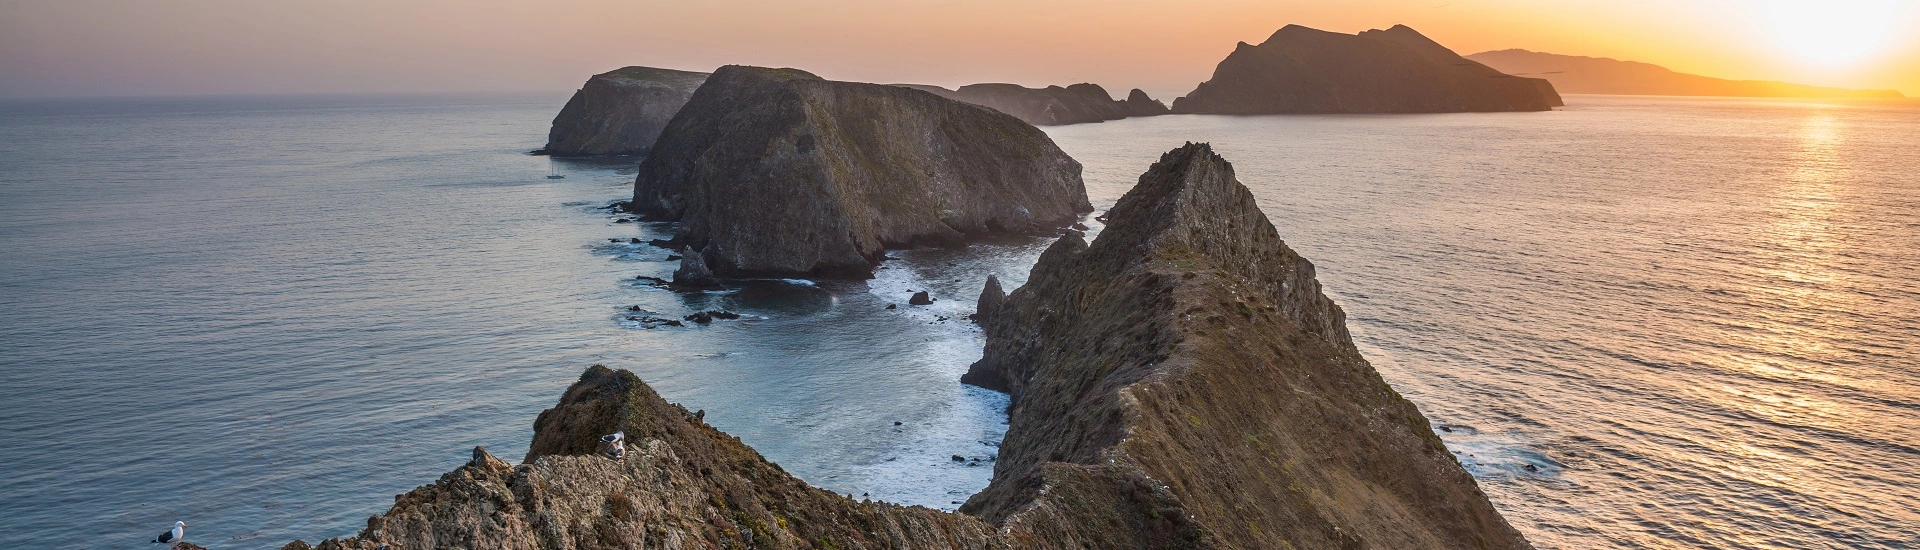 California - Sunset in Channel Islands